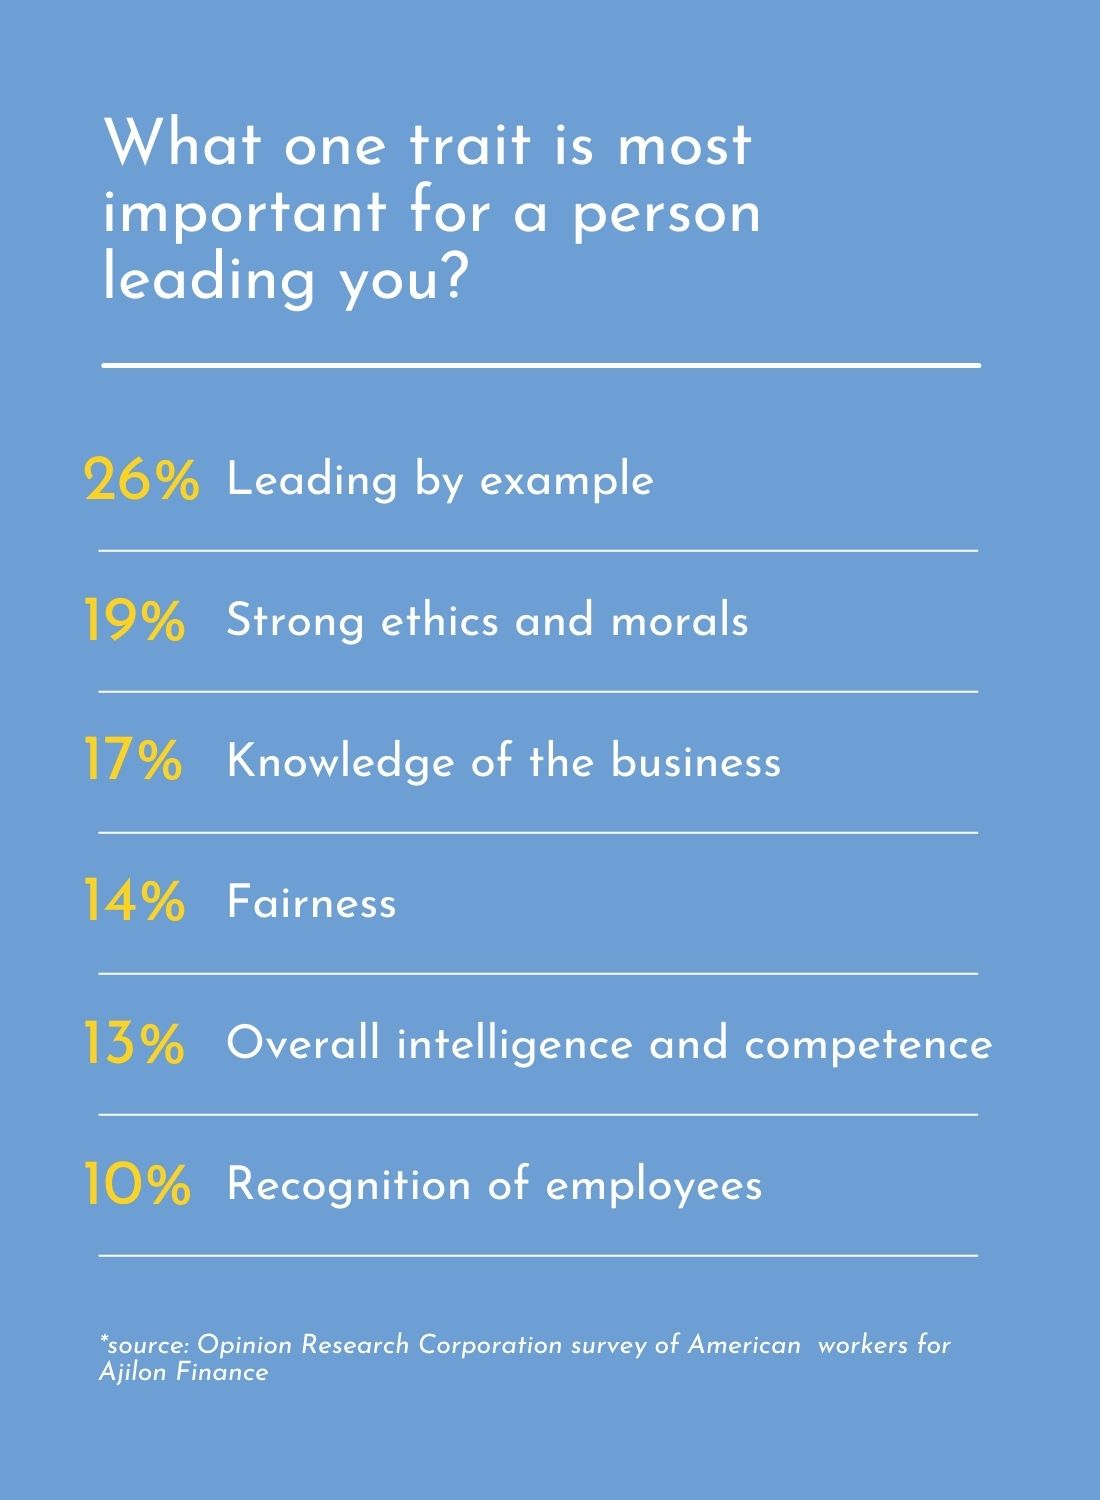 What one trait is most important for a person leading you?

26% Leading by example 
19% Strong ethics and morals
17% Knowledge of the business
14% Fairness
13% Overall intelligence and competence 
10% Recognition of employees

*source: Opinion Research Corporation survey of American  workers for Ajilon Finance